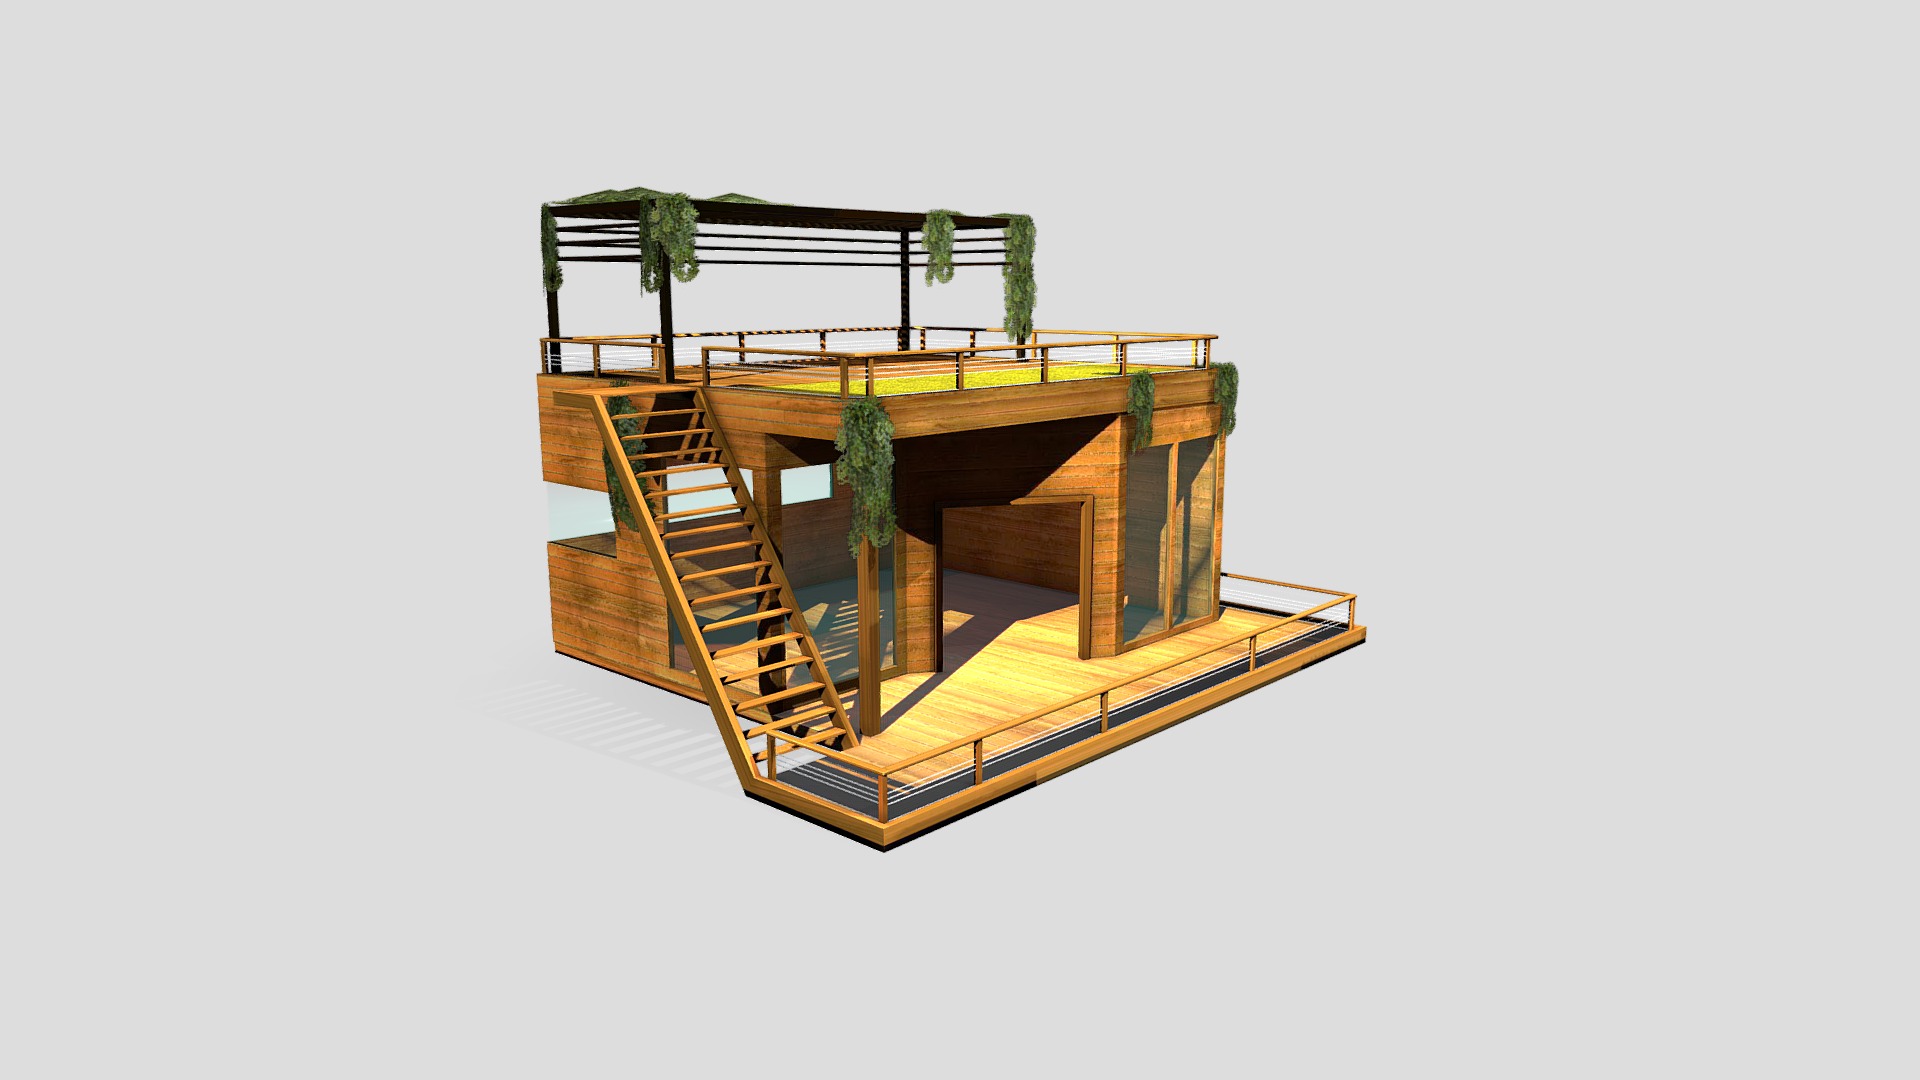 3D model FBX Floating Boat Yatch Modern Wooden House - This is a 3D model of the FBX Floating Boat Yatch Modern Wooden House. The 3D model is about a wood structure with a ladder.